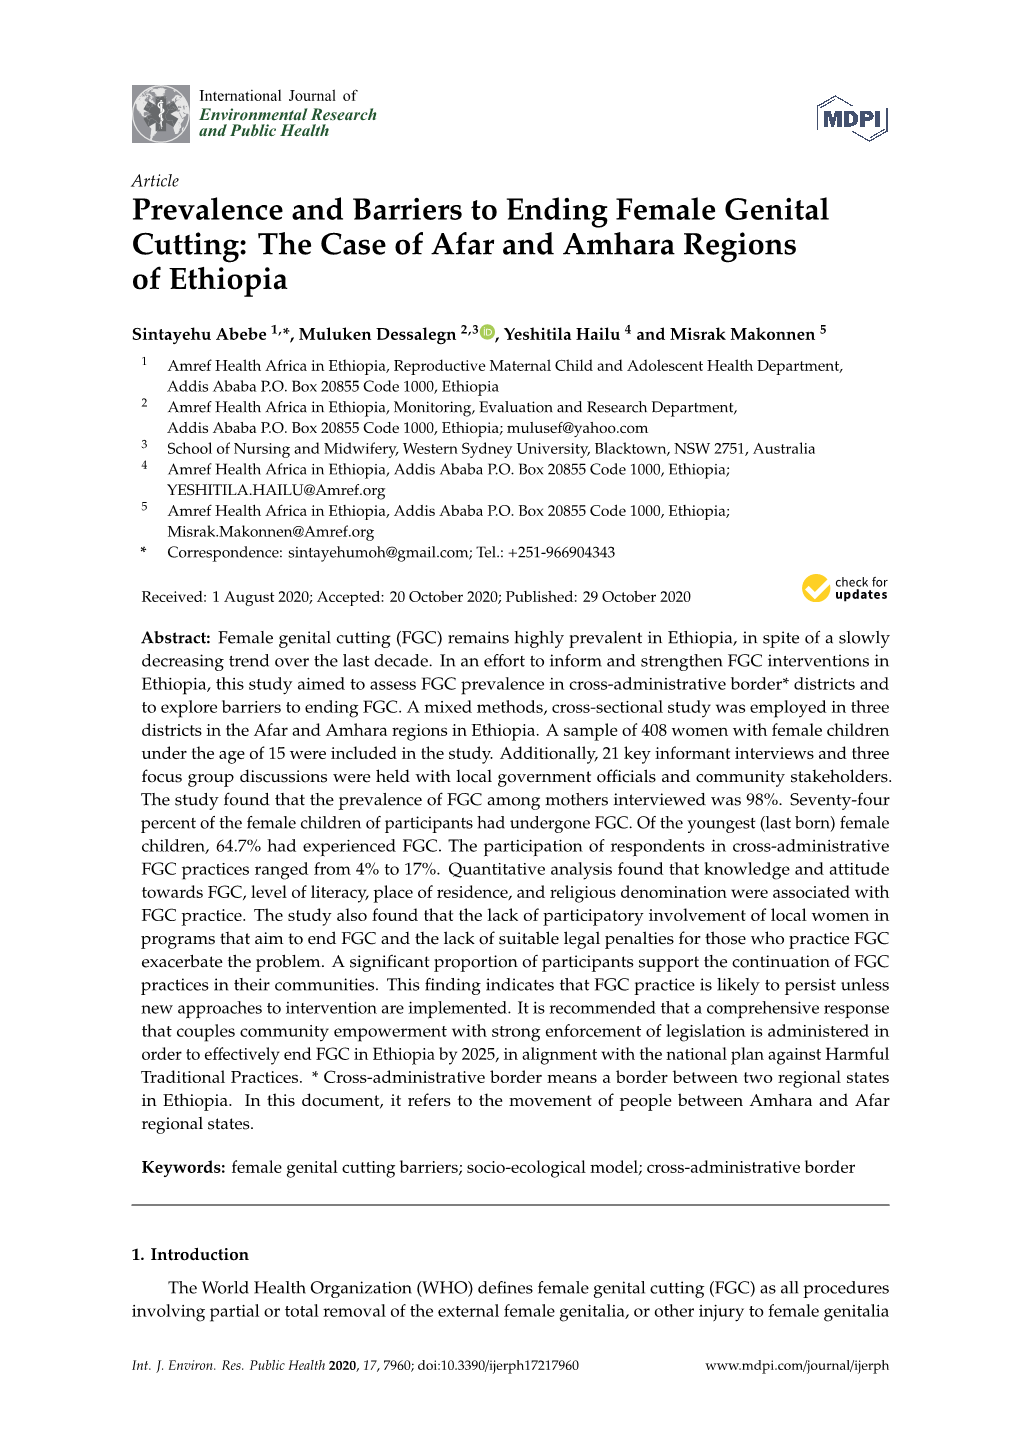 Prevalence and Barriers to Ending Female Genital Cutting: the Case of Afar and Amhara Regions of Ethiopia